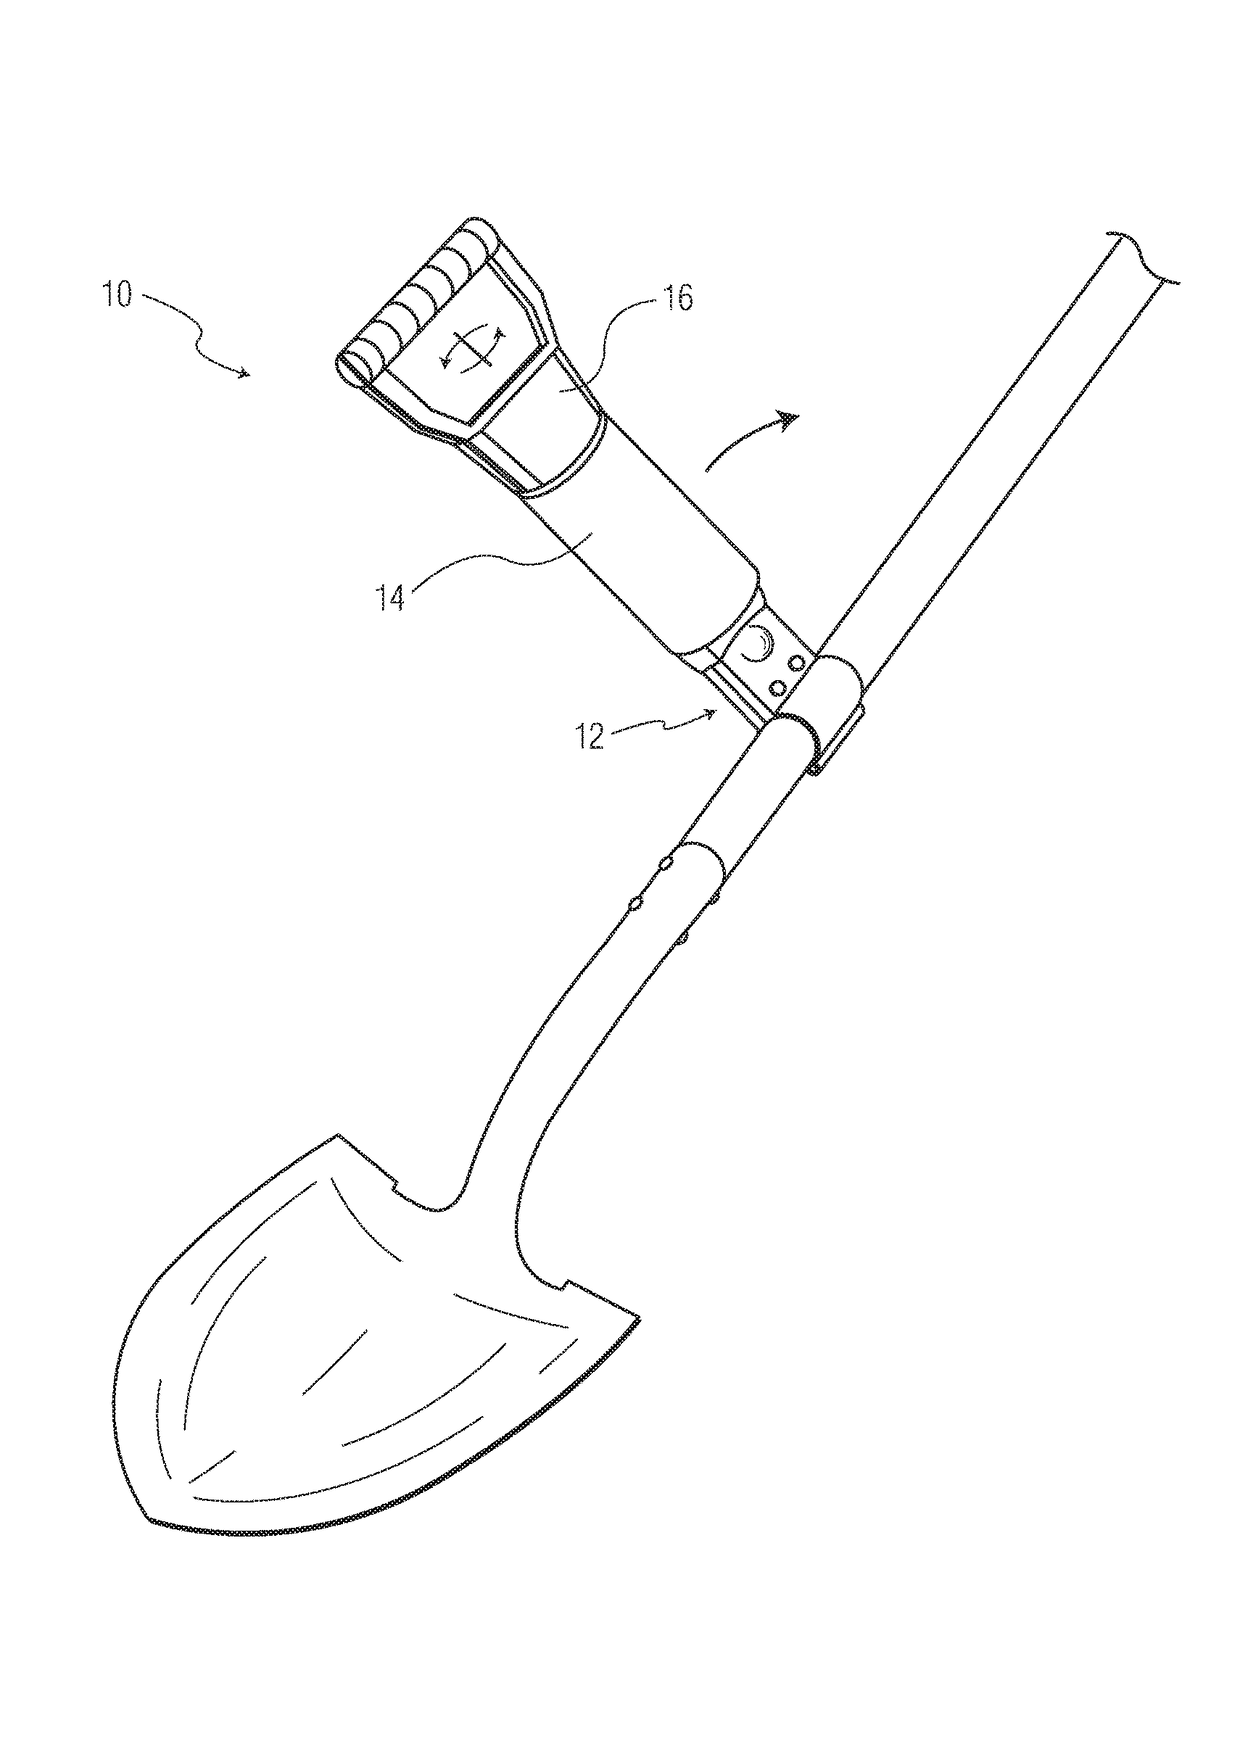 Auxiliary handle attachment for a material-moving tool